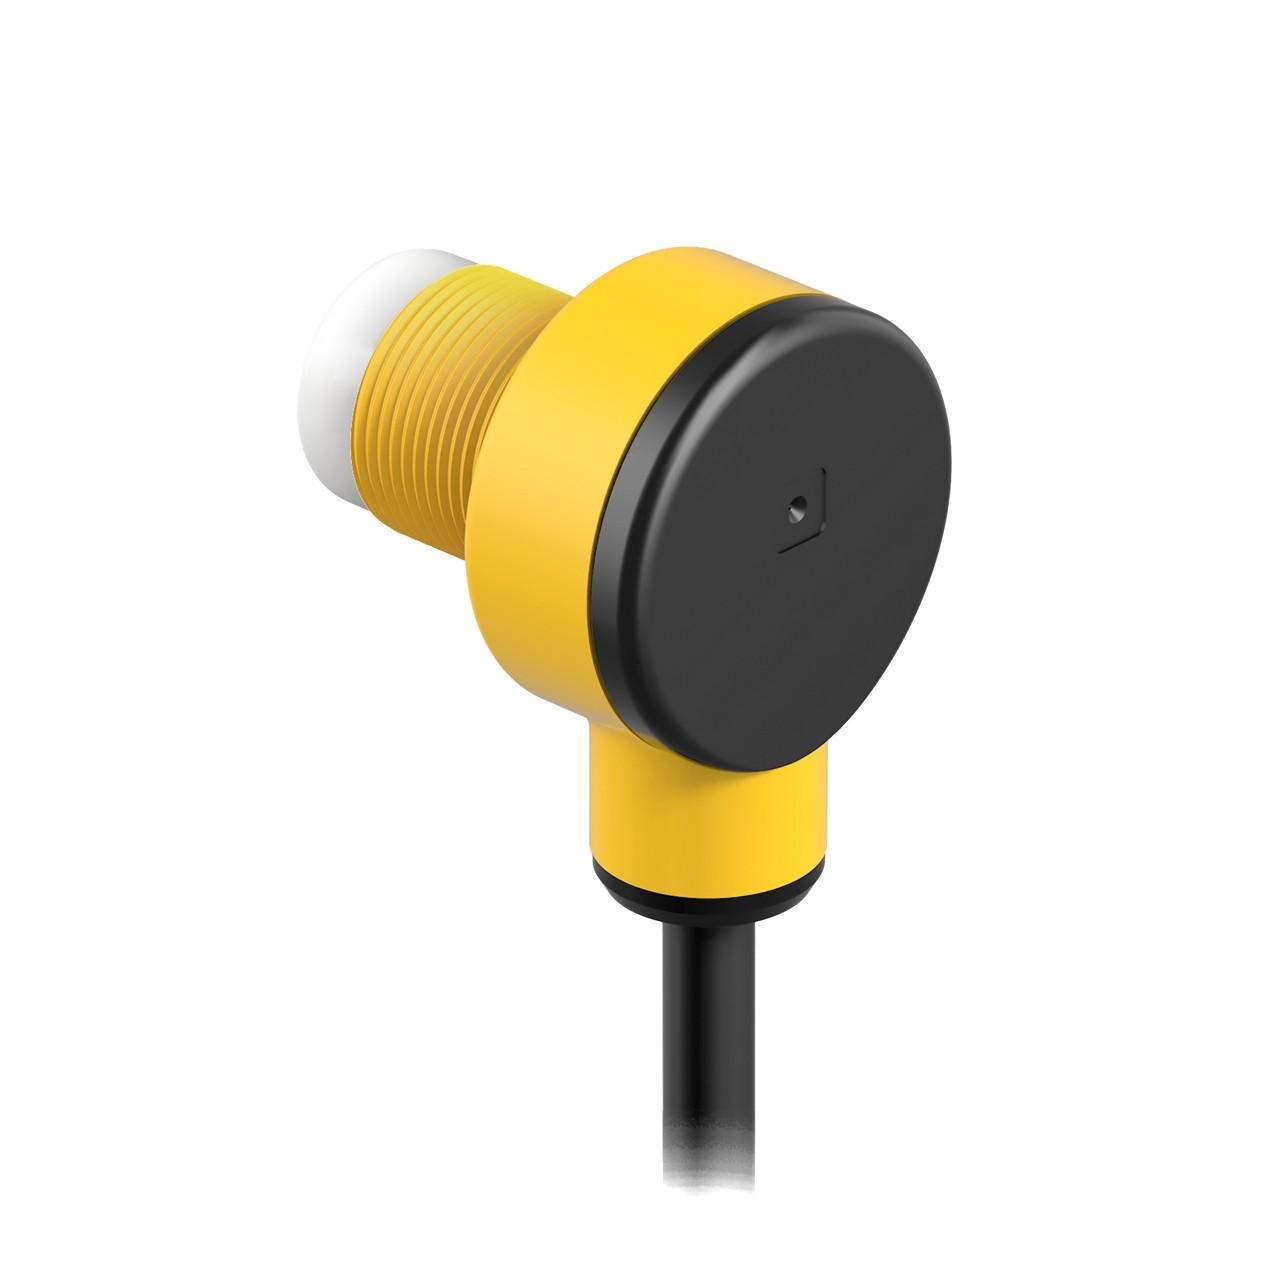 Banner T18XXYPQPMA T18 Series EZ-LIGHT: 1-Color General Purpose Indicator, Voltage: 10-30 V dc; Housing: Thermoplastic Poly; I, Input: PNP; Color: Yellow, Euro 4-pin 150 mm (6 in) PUR Pigtail Connector